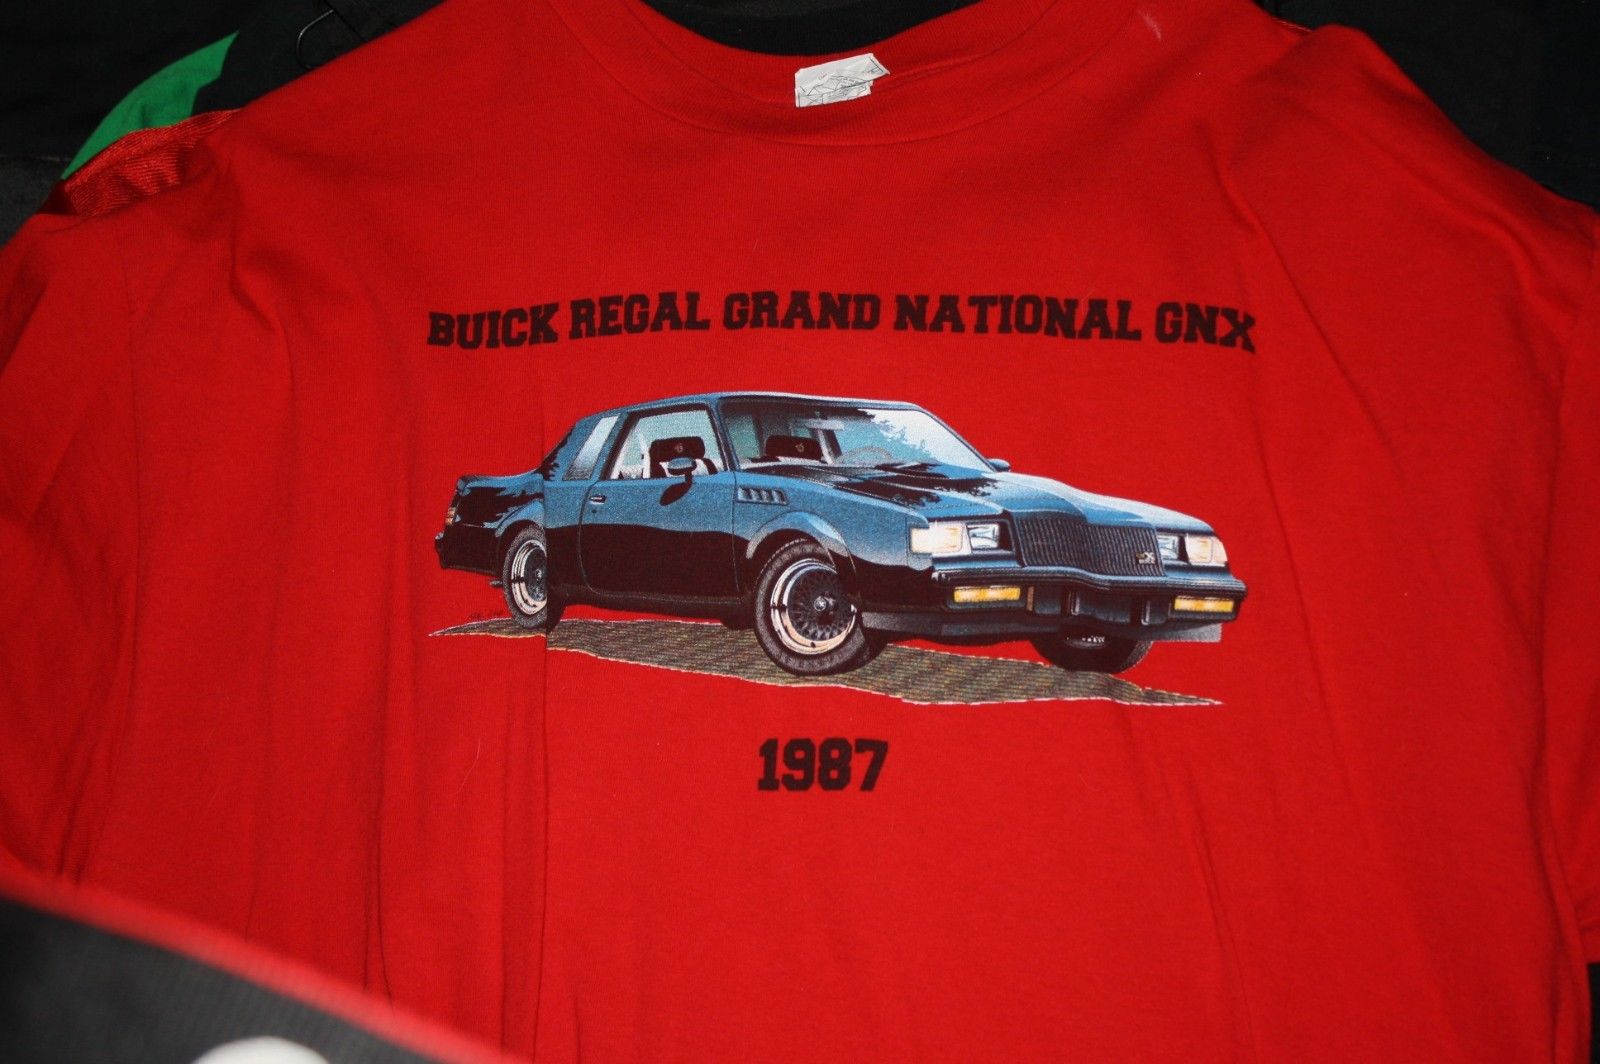 More Cool Buick Shirts